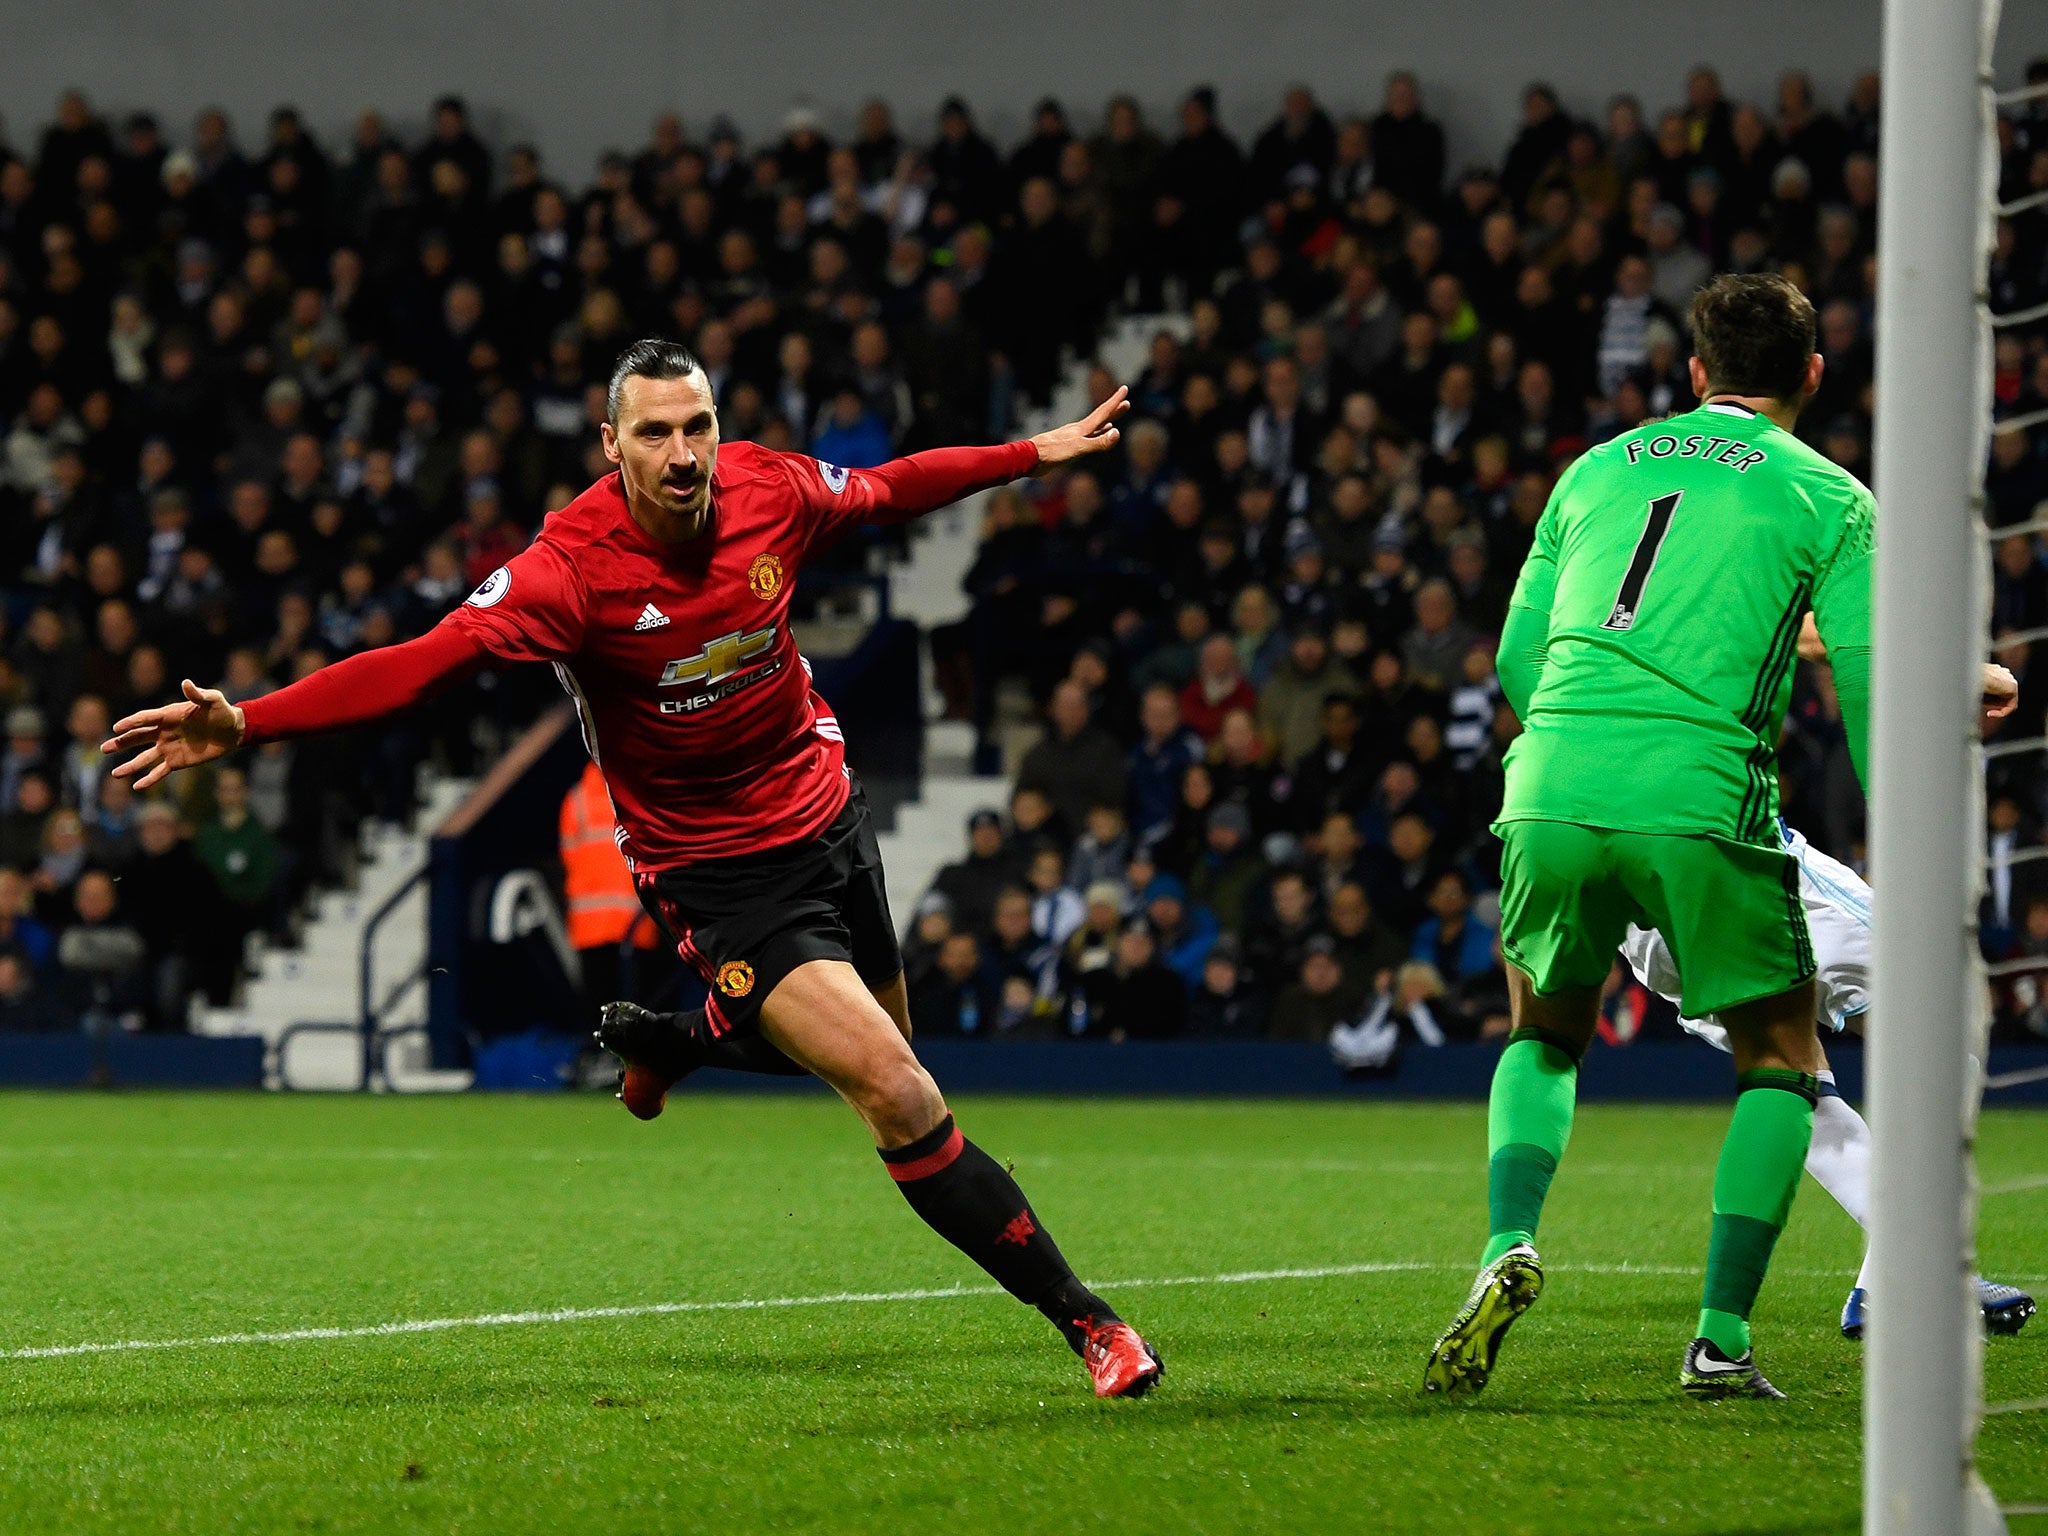 Zlatan Ibrahimovic in action for Manchester United against West Brom